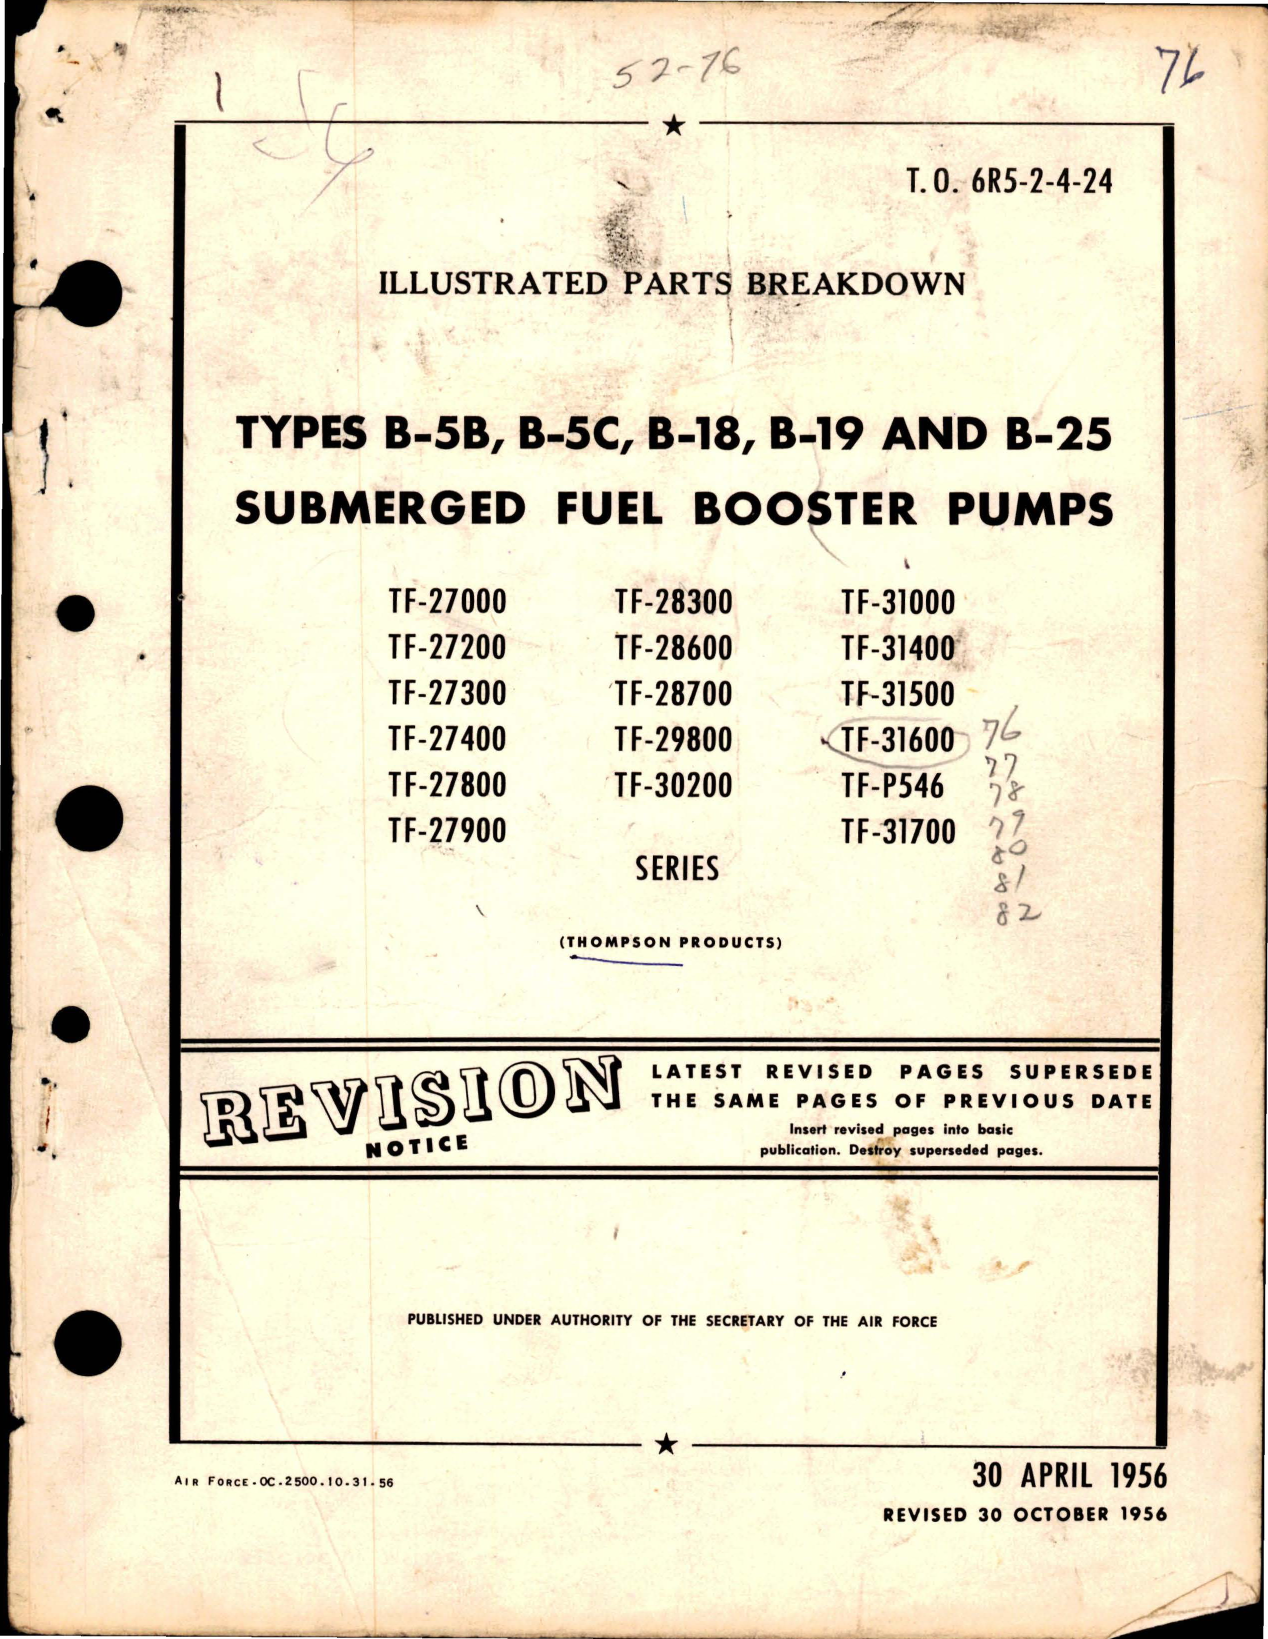 Sample page 1 from AirCorps Library document: Illustrated Parts Breakdown for Submerged Fuel Booster Pumps - Types B-5B, B-5C, B-18, B-19 and B-25